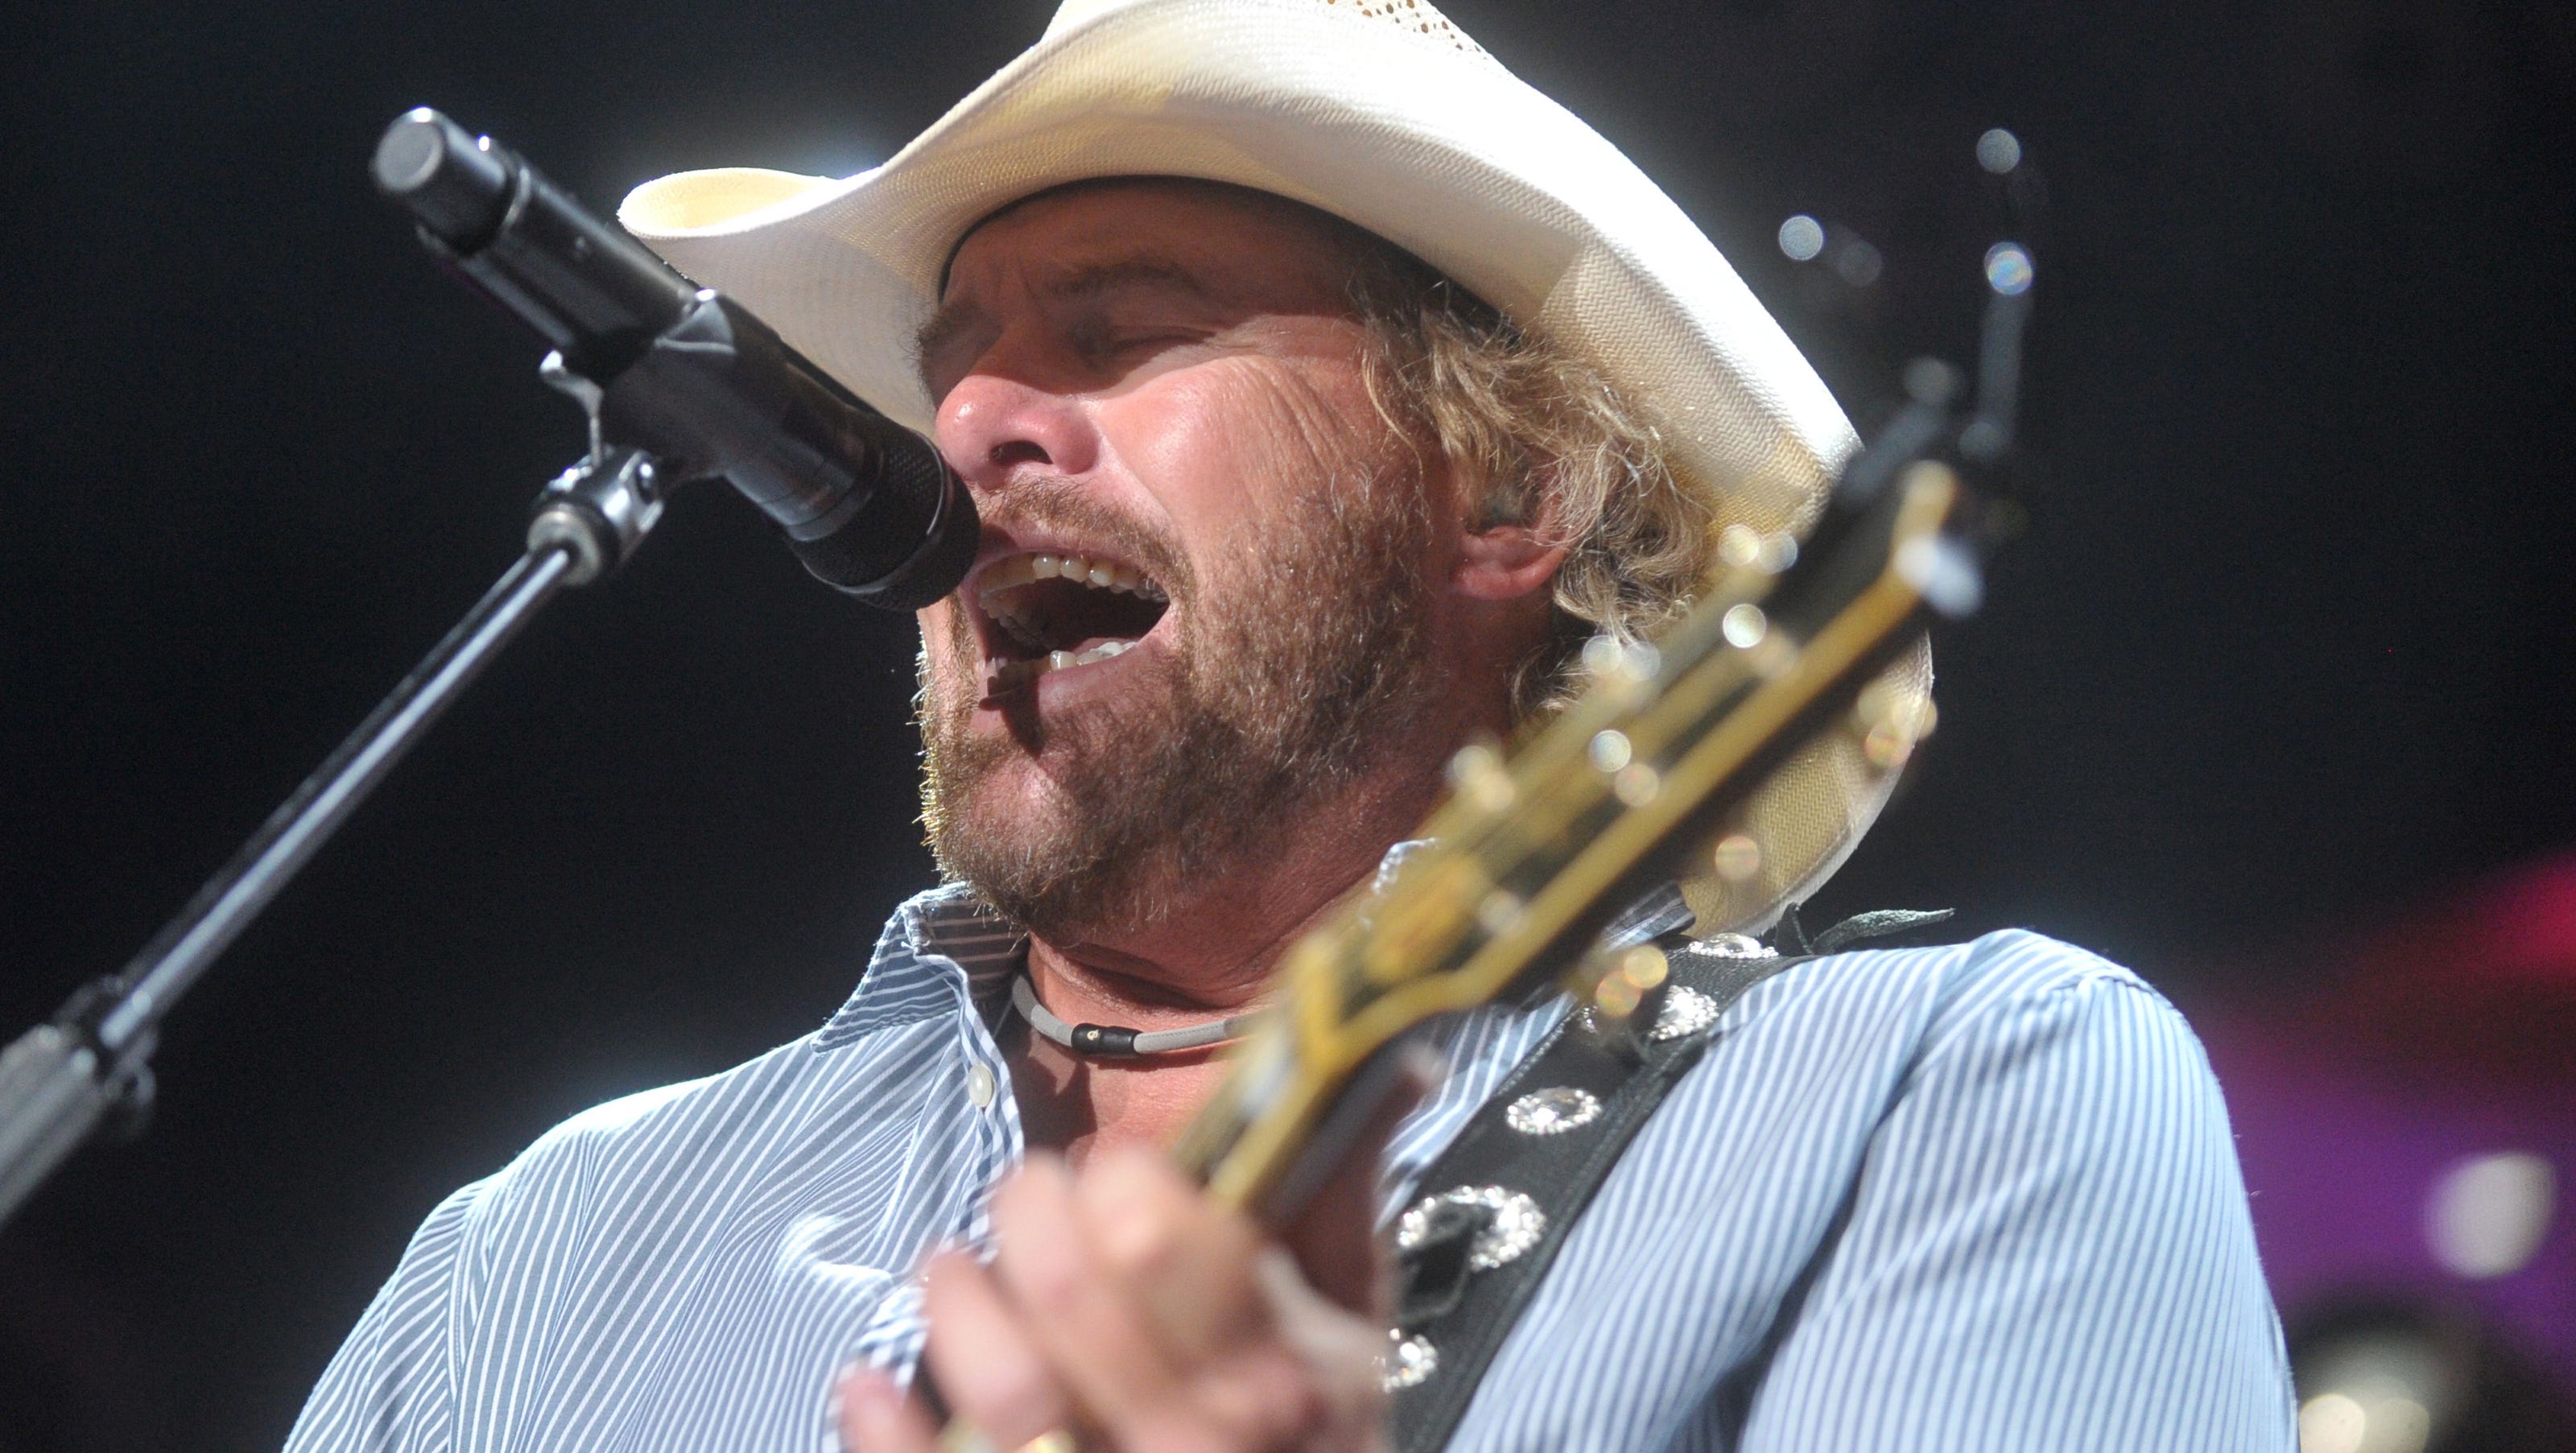 Listen Up: Toby Keith, more